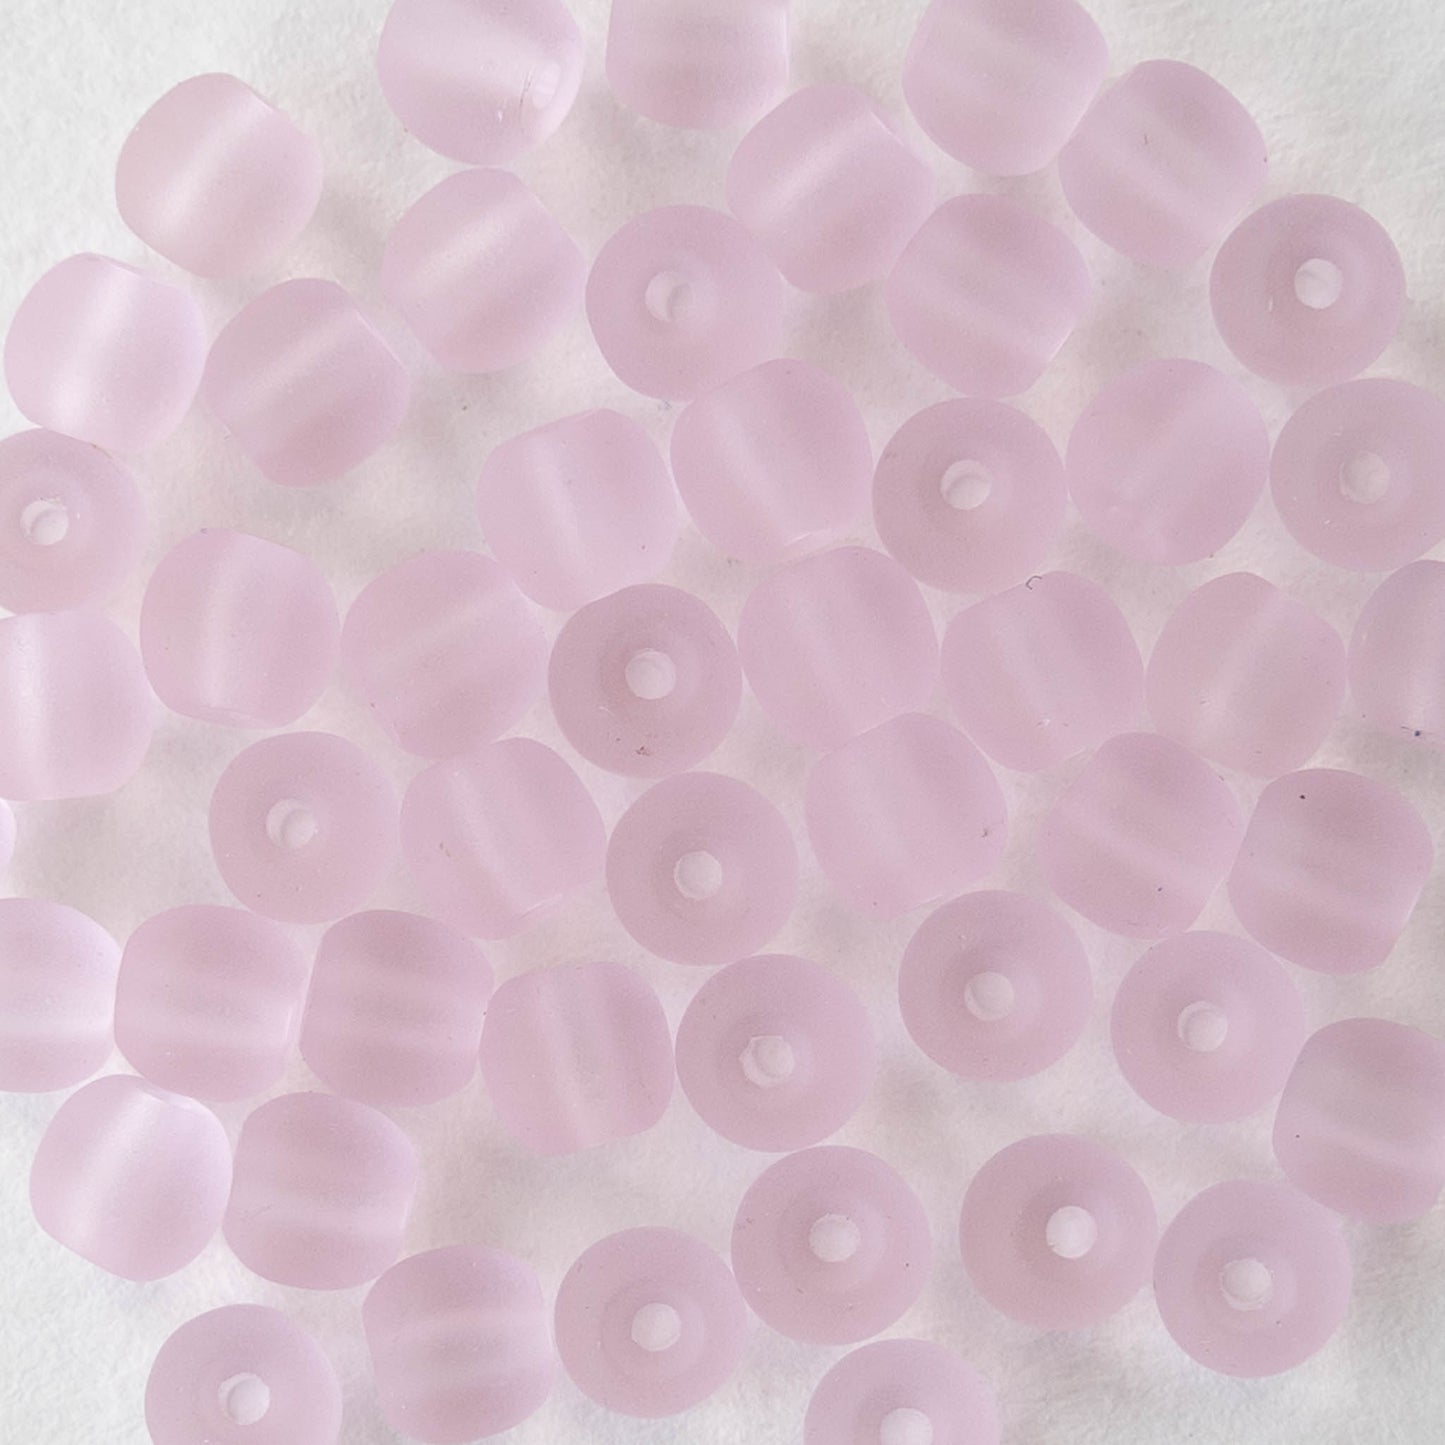 5mm Frosted Glass Rounds - Pink - 16 Inches